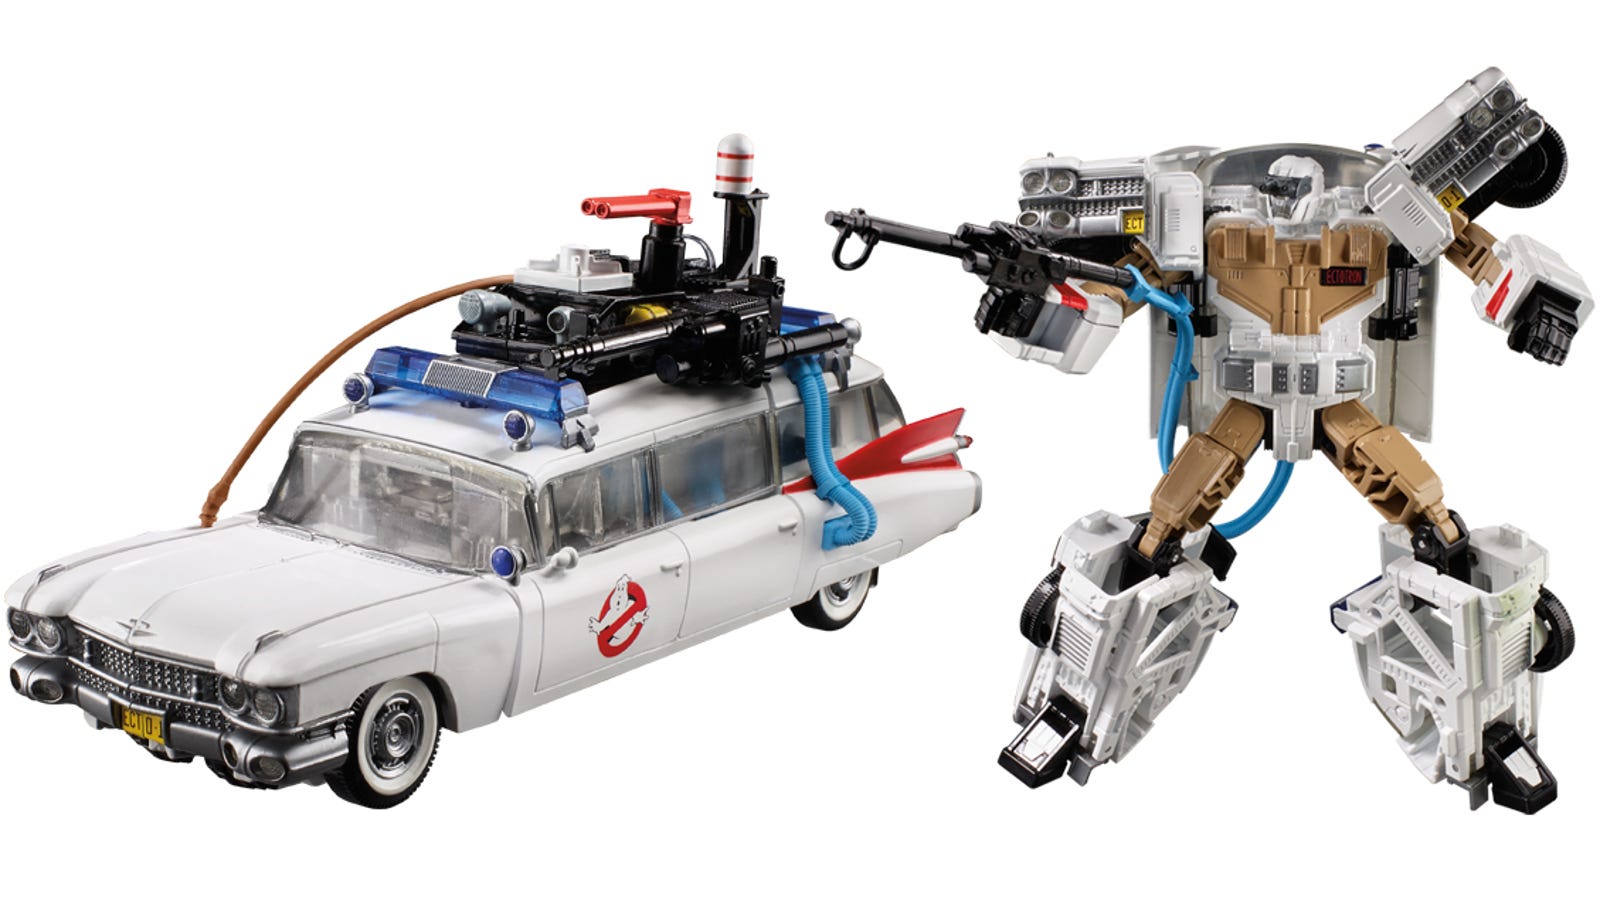 Transformers Meets Ghostbusters in Hasbro's New Ectotron Toy
 Ghostbusters Toy